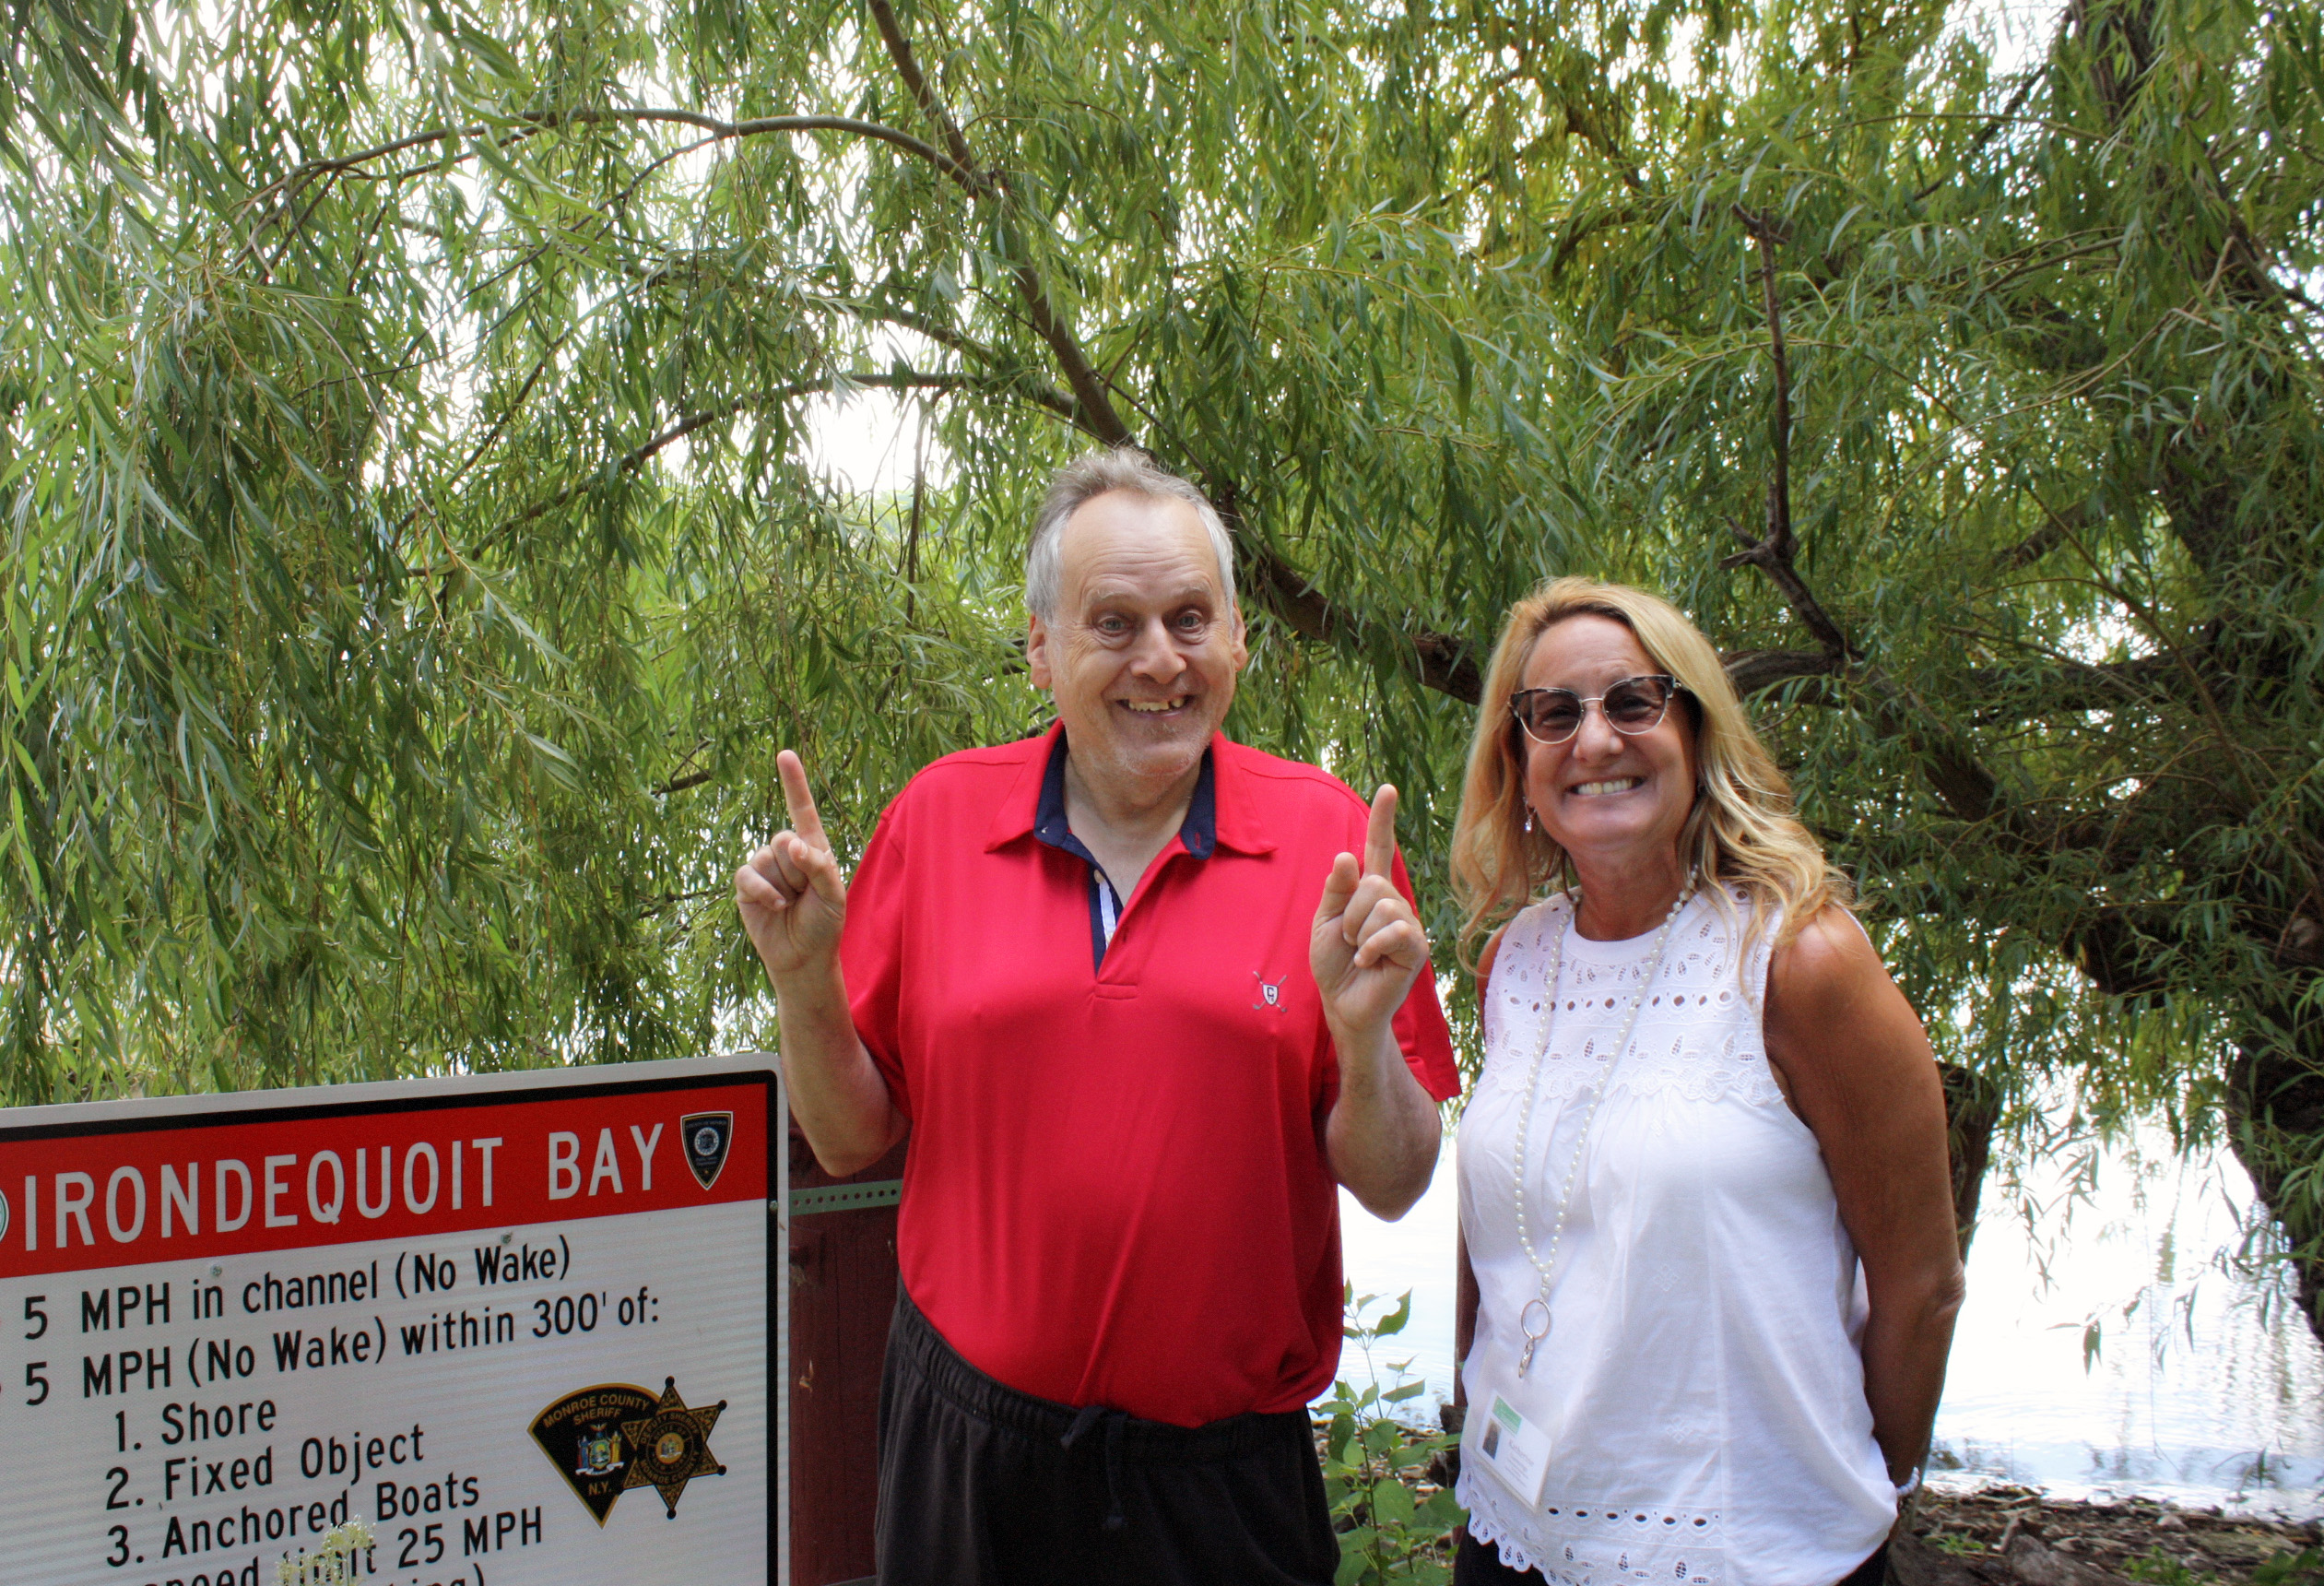 Image shows two adults smiling and standing by sign at Irondequoit Bay